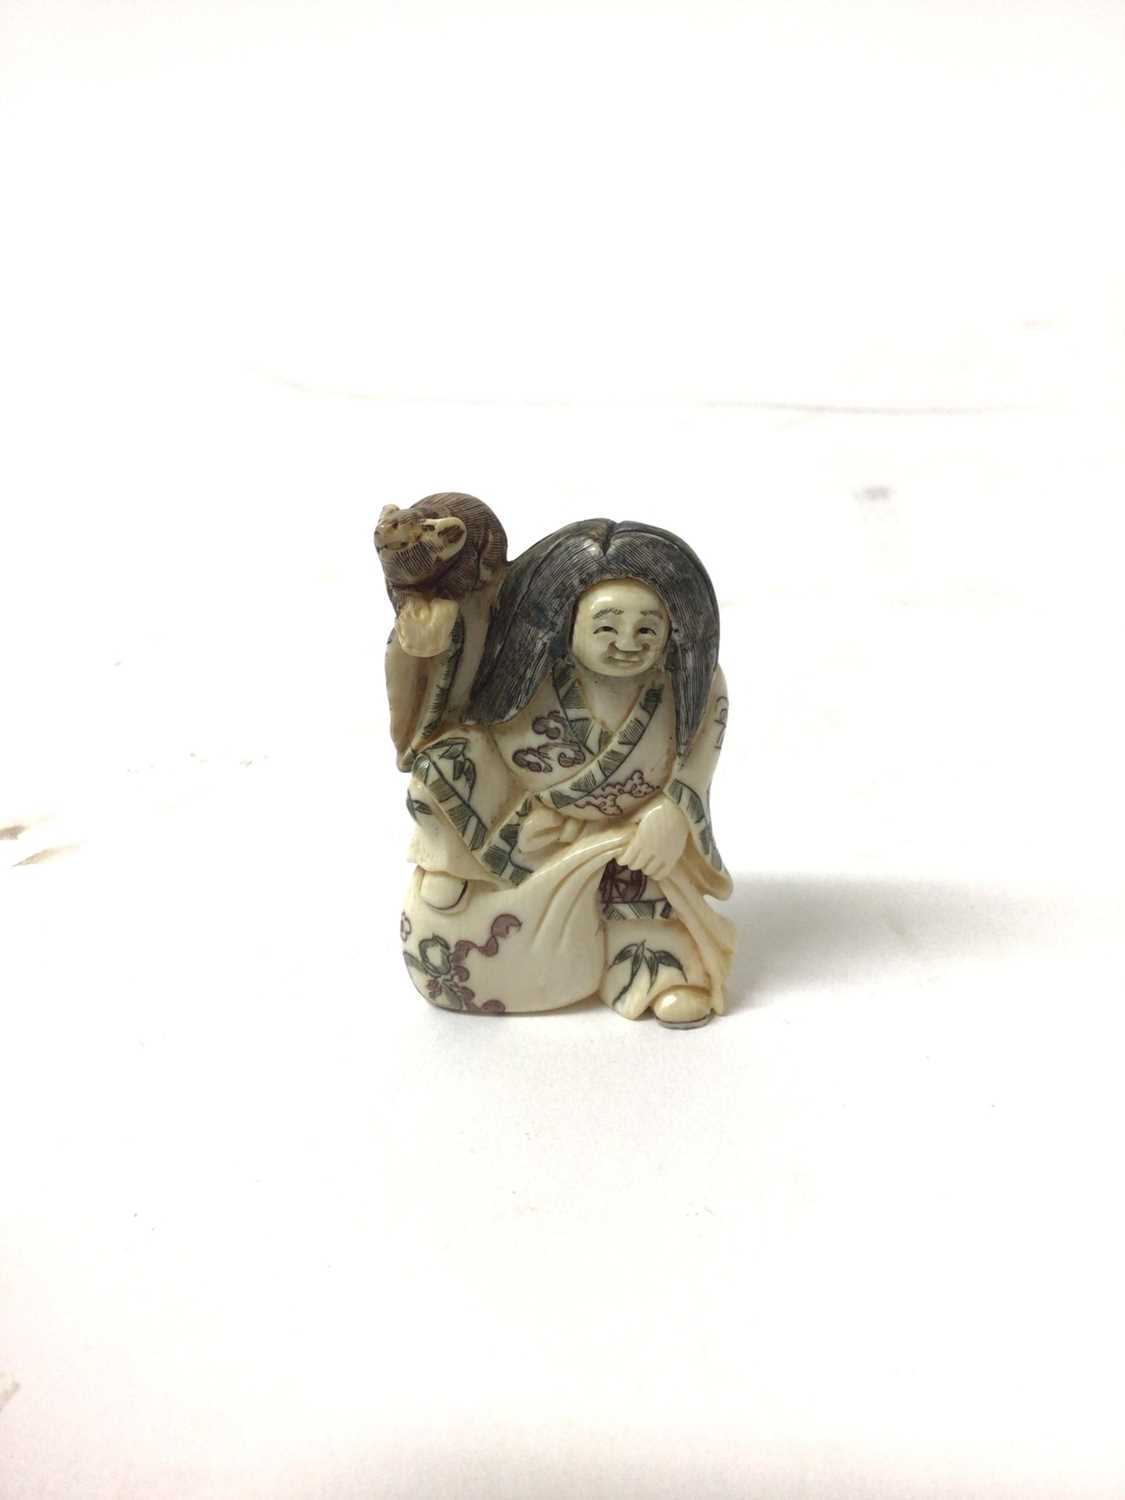 Lot 38 - 19th century Japanese cared ivory netsuke of a Noh theatre figure with revolving head, 5.5cm high